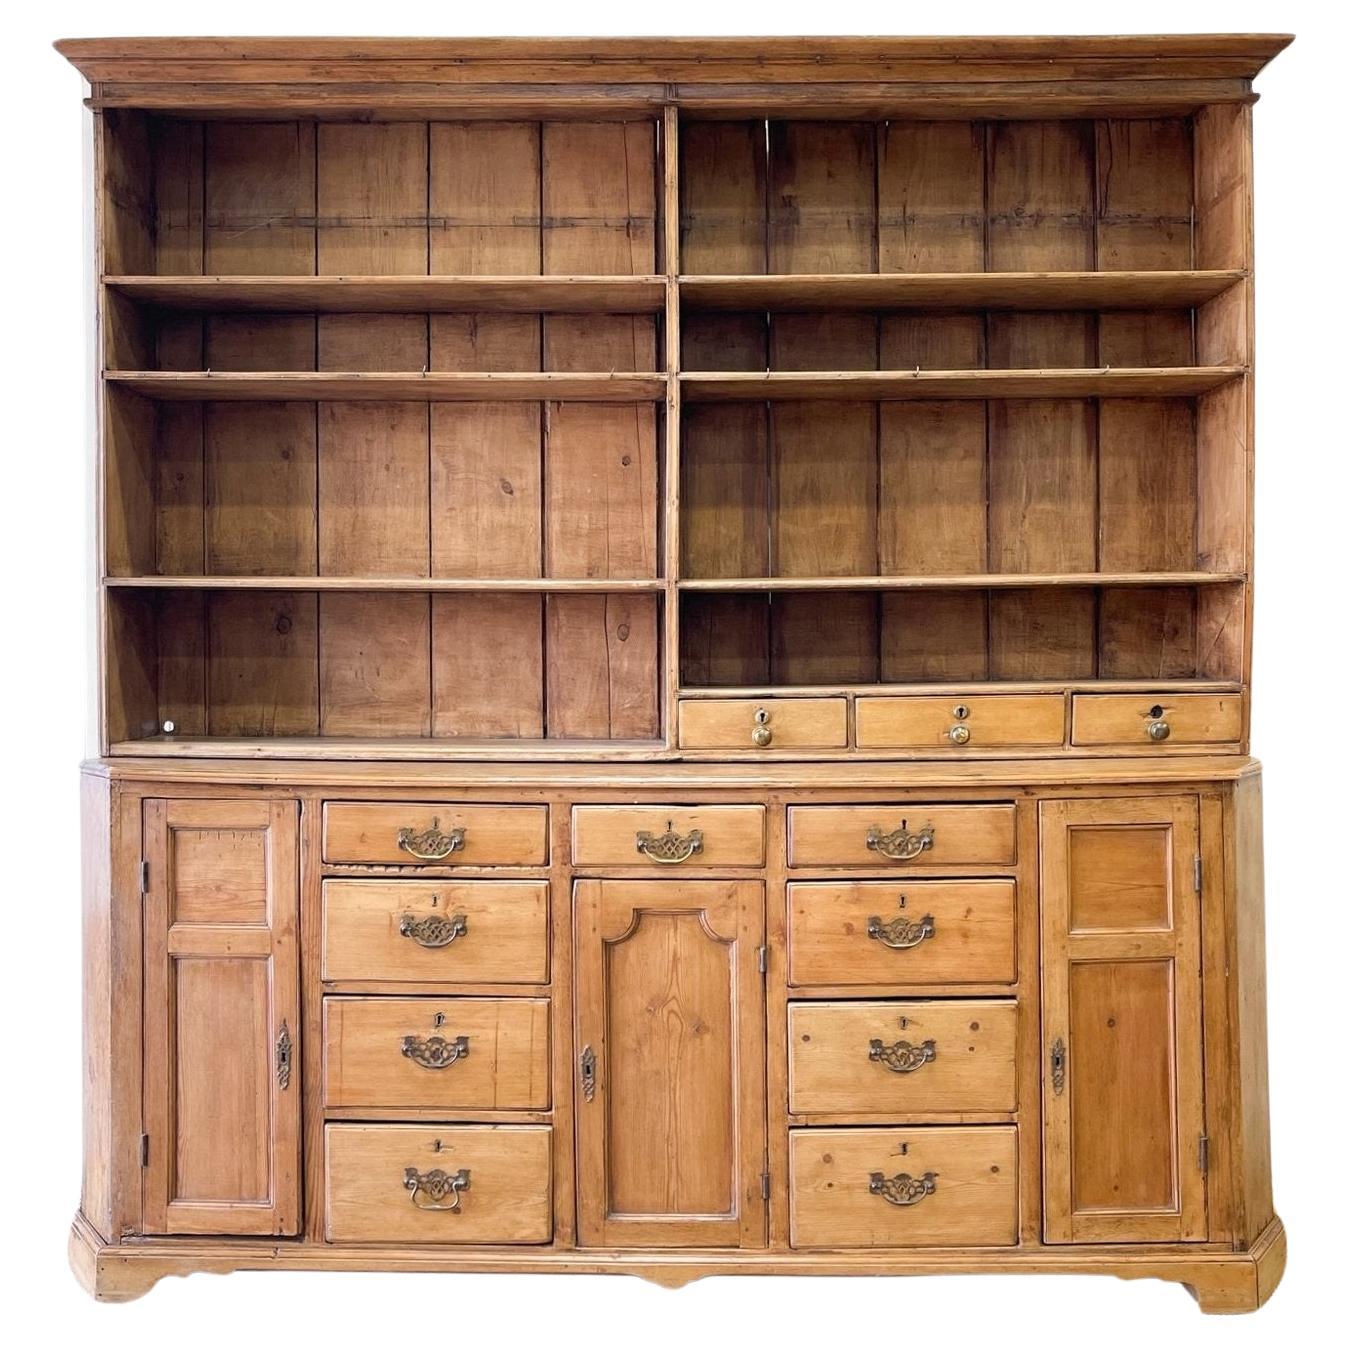 An Early 19th Century Pine Welsh Dresser or Cupboard with Chamfered Corners For Sale